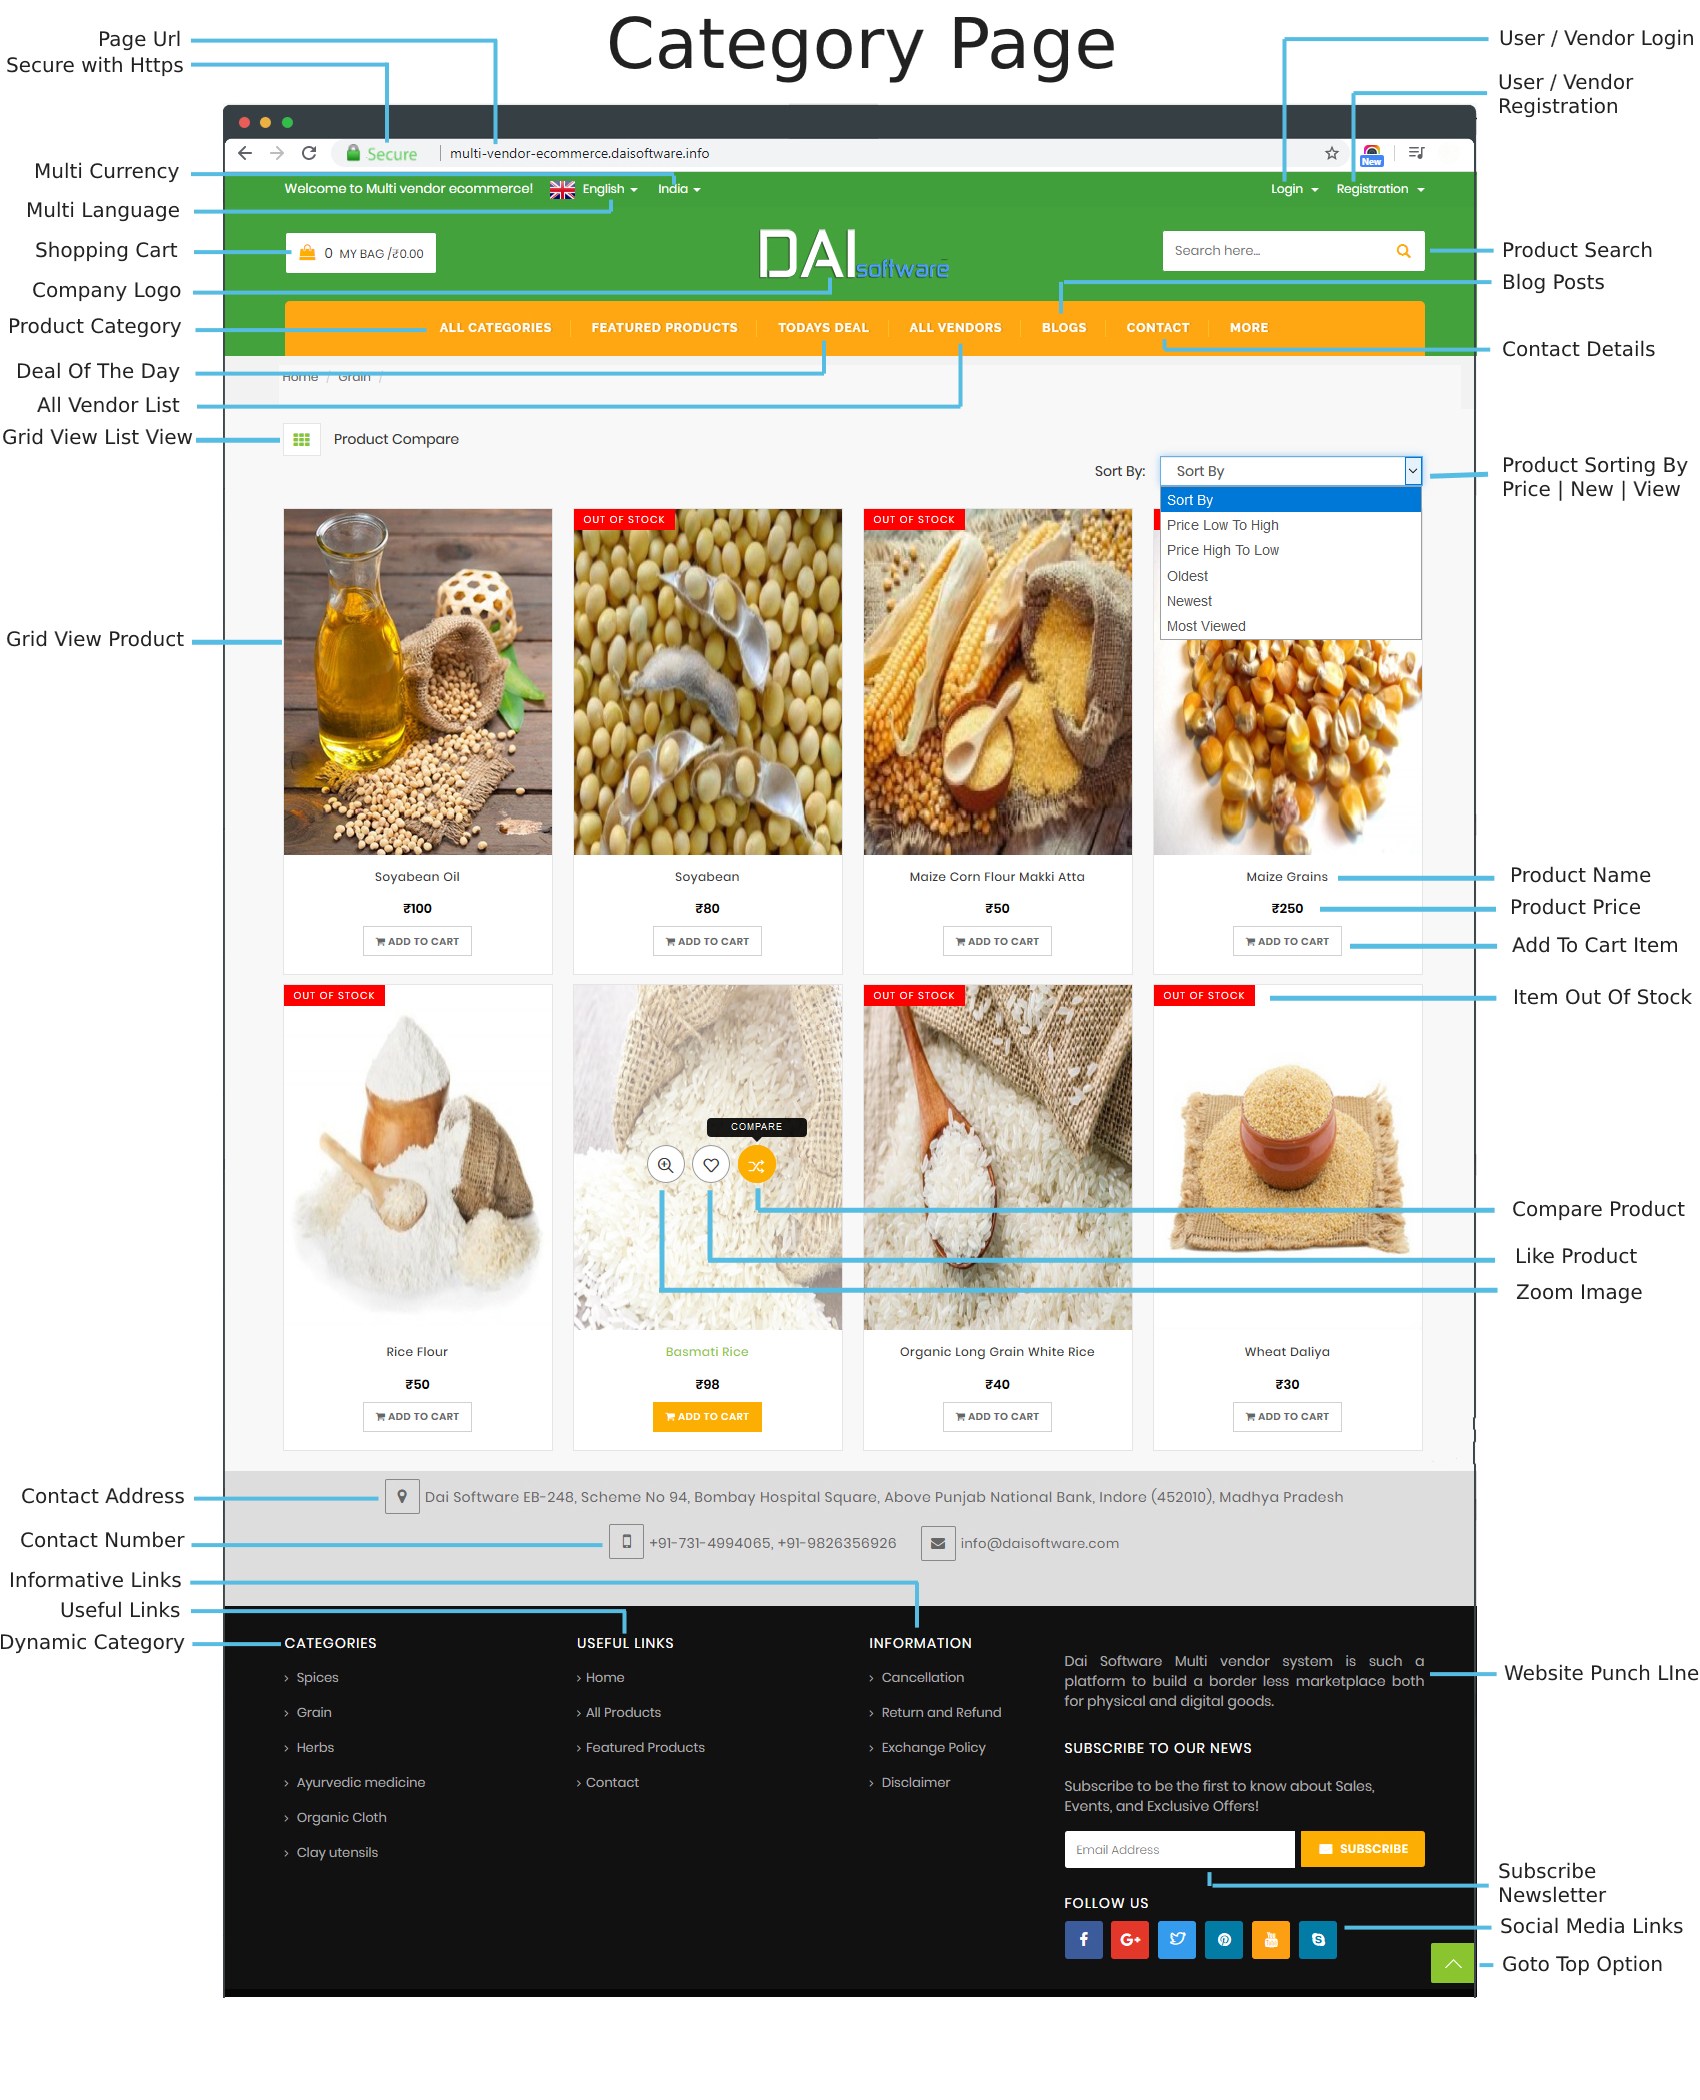 Essential Features of Multi Vendor eCommerce Site Category Page